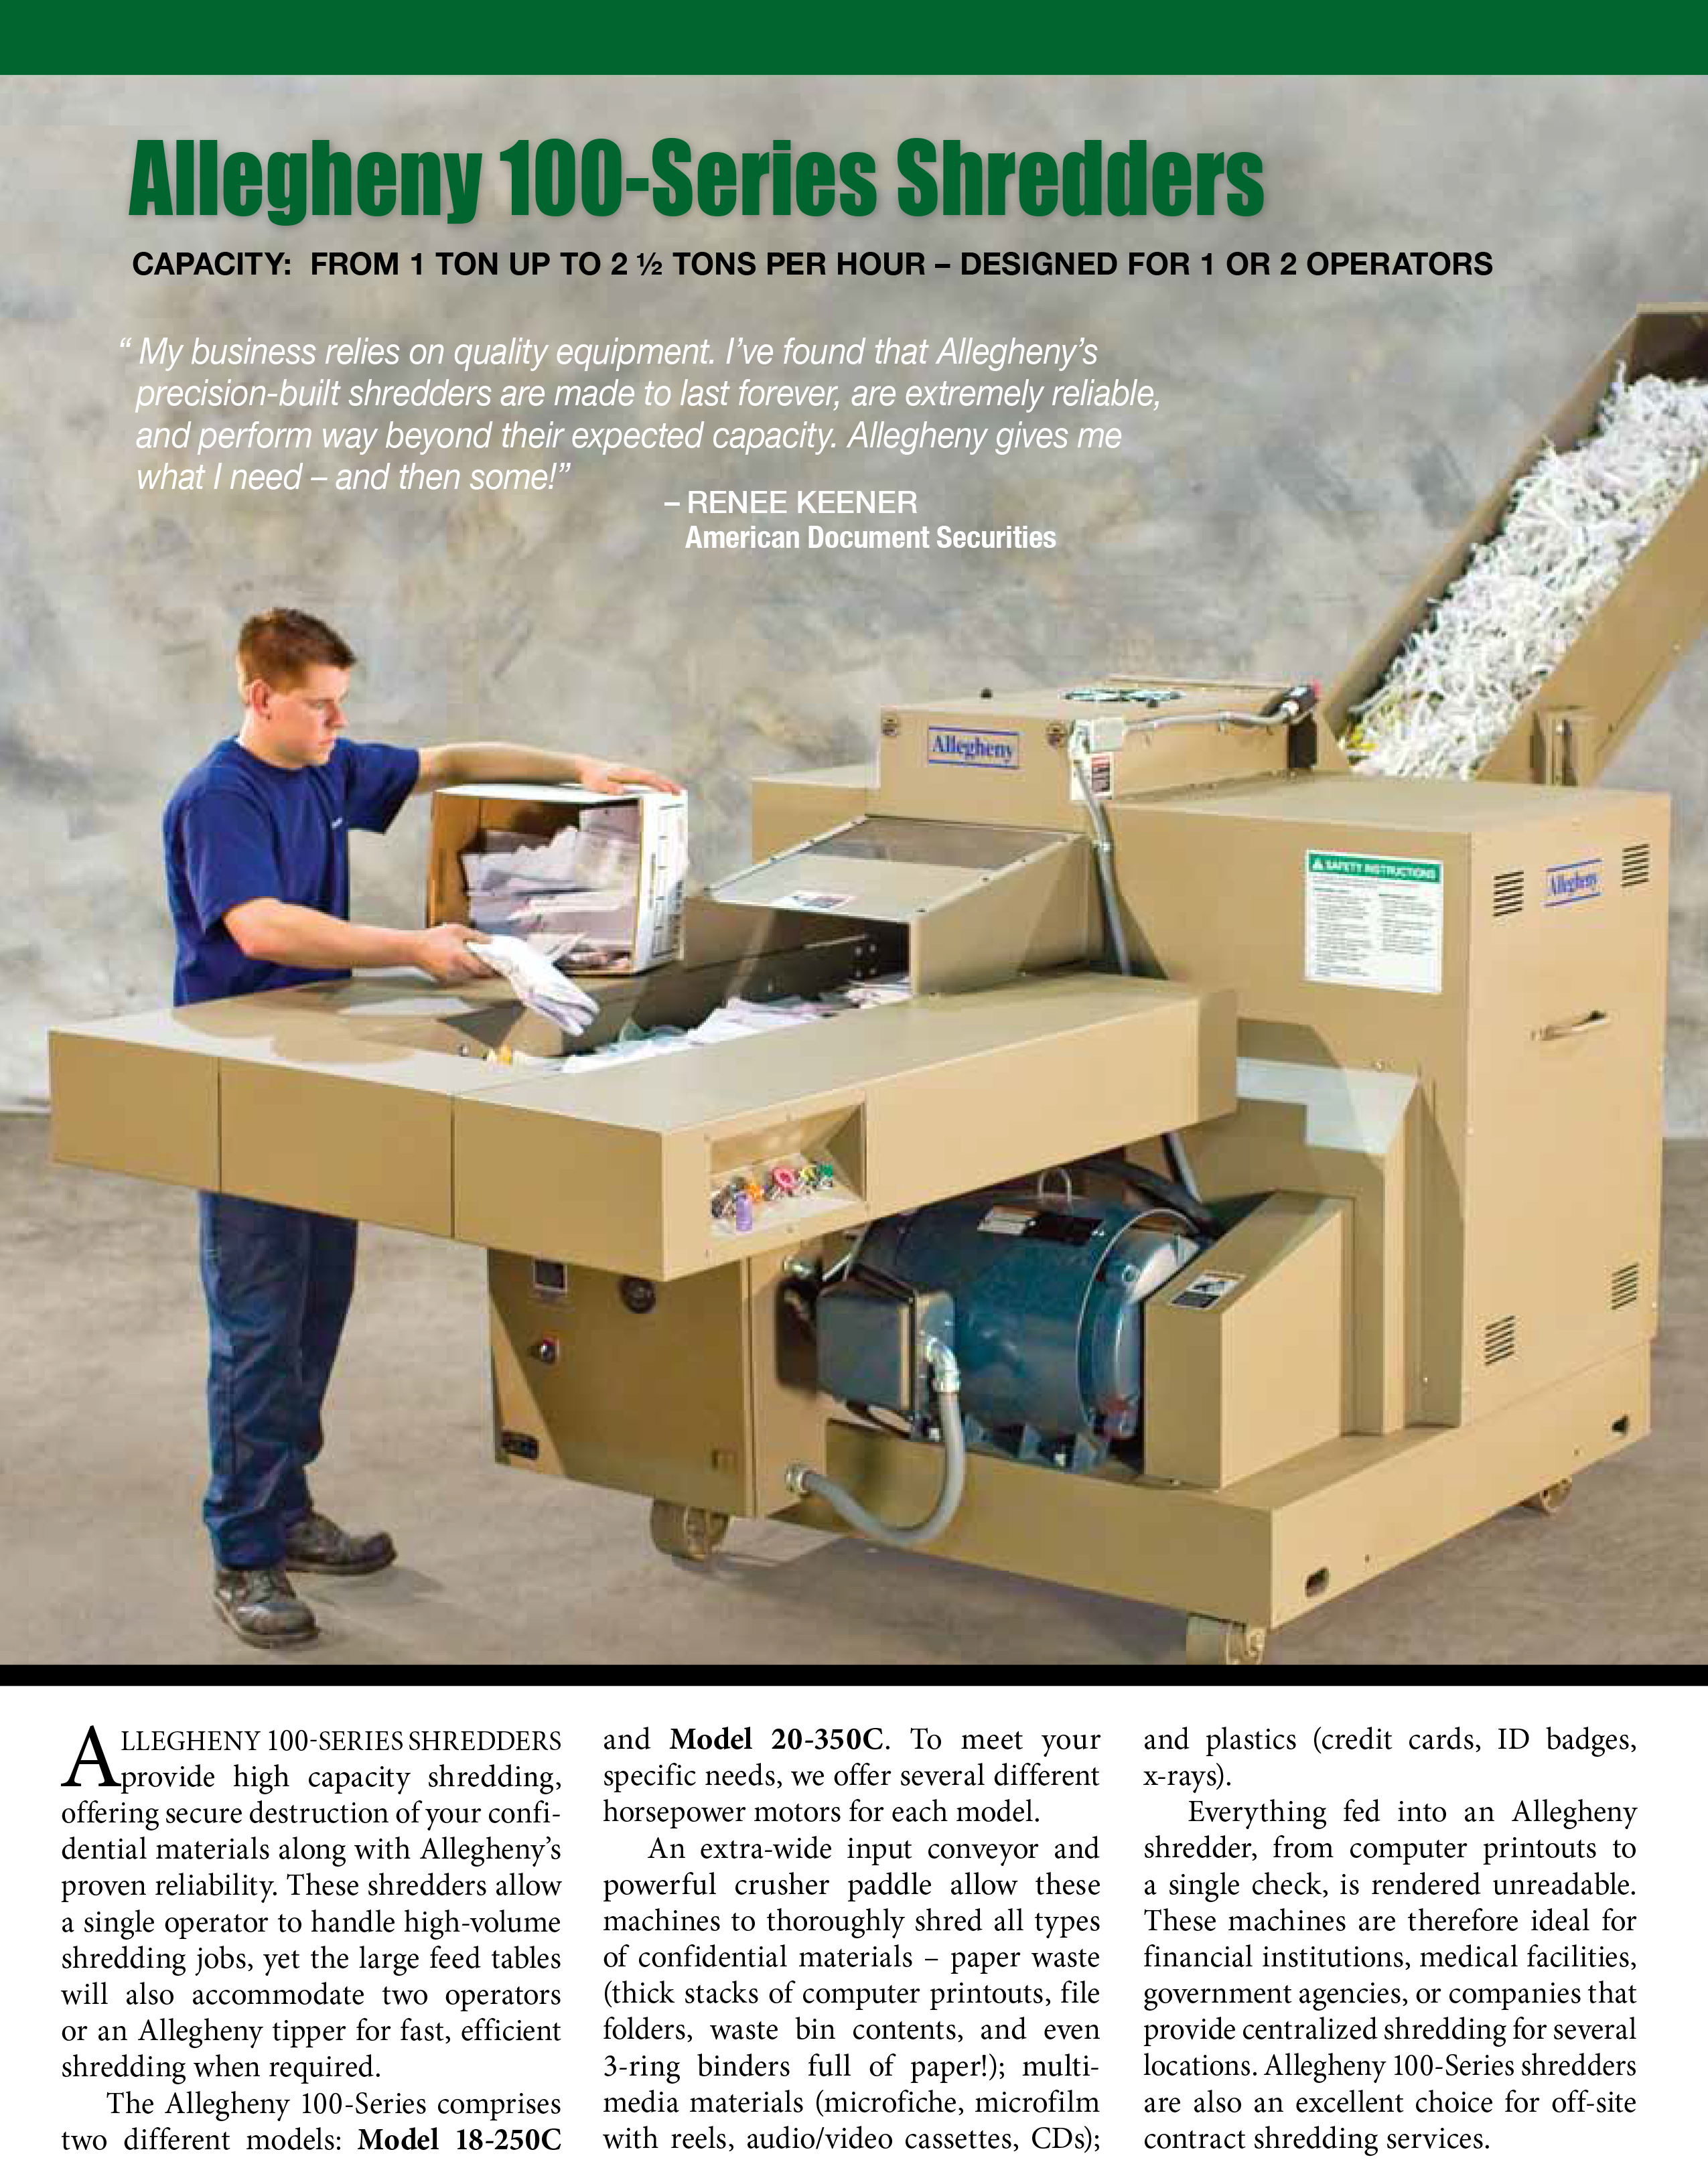 Learn more about the 100-Series Shredders in the Allegheny Brochure.